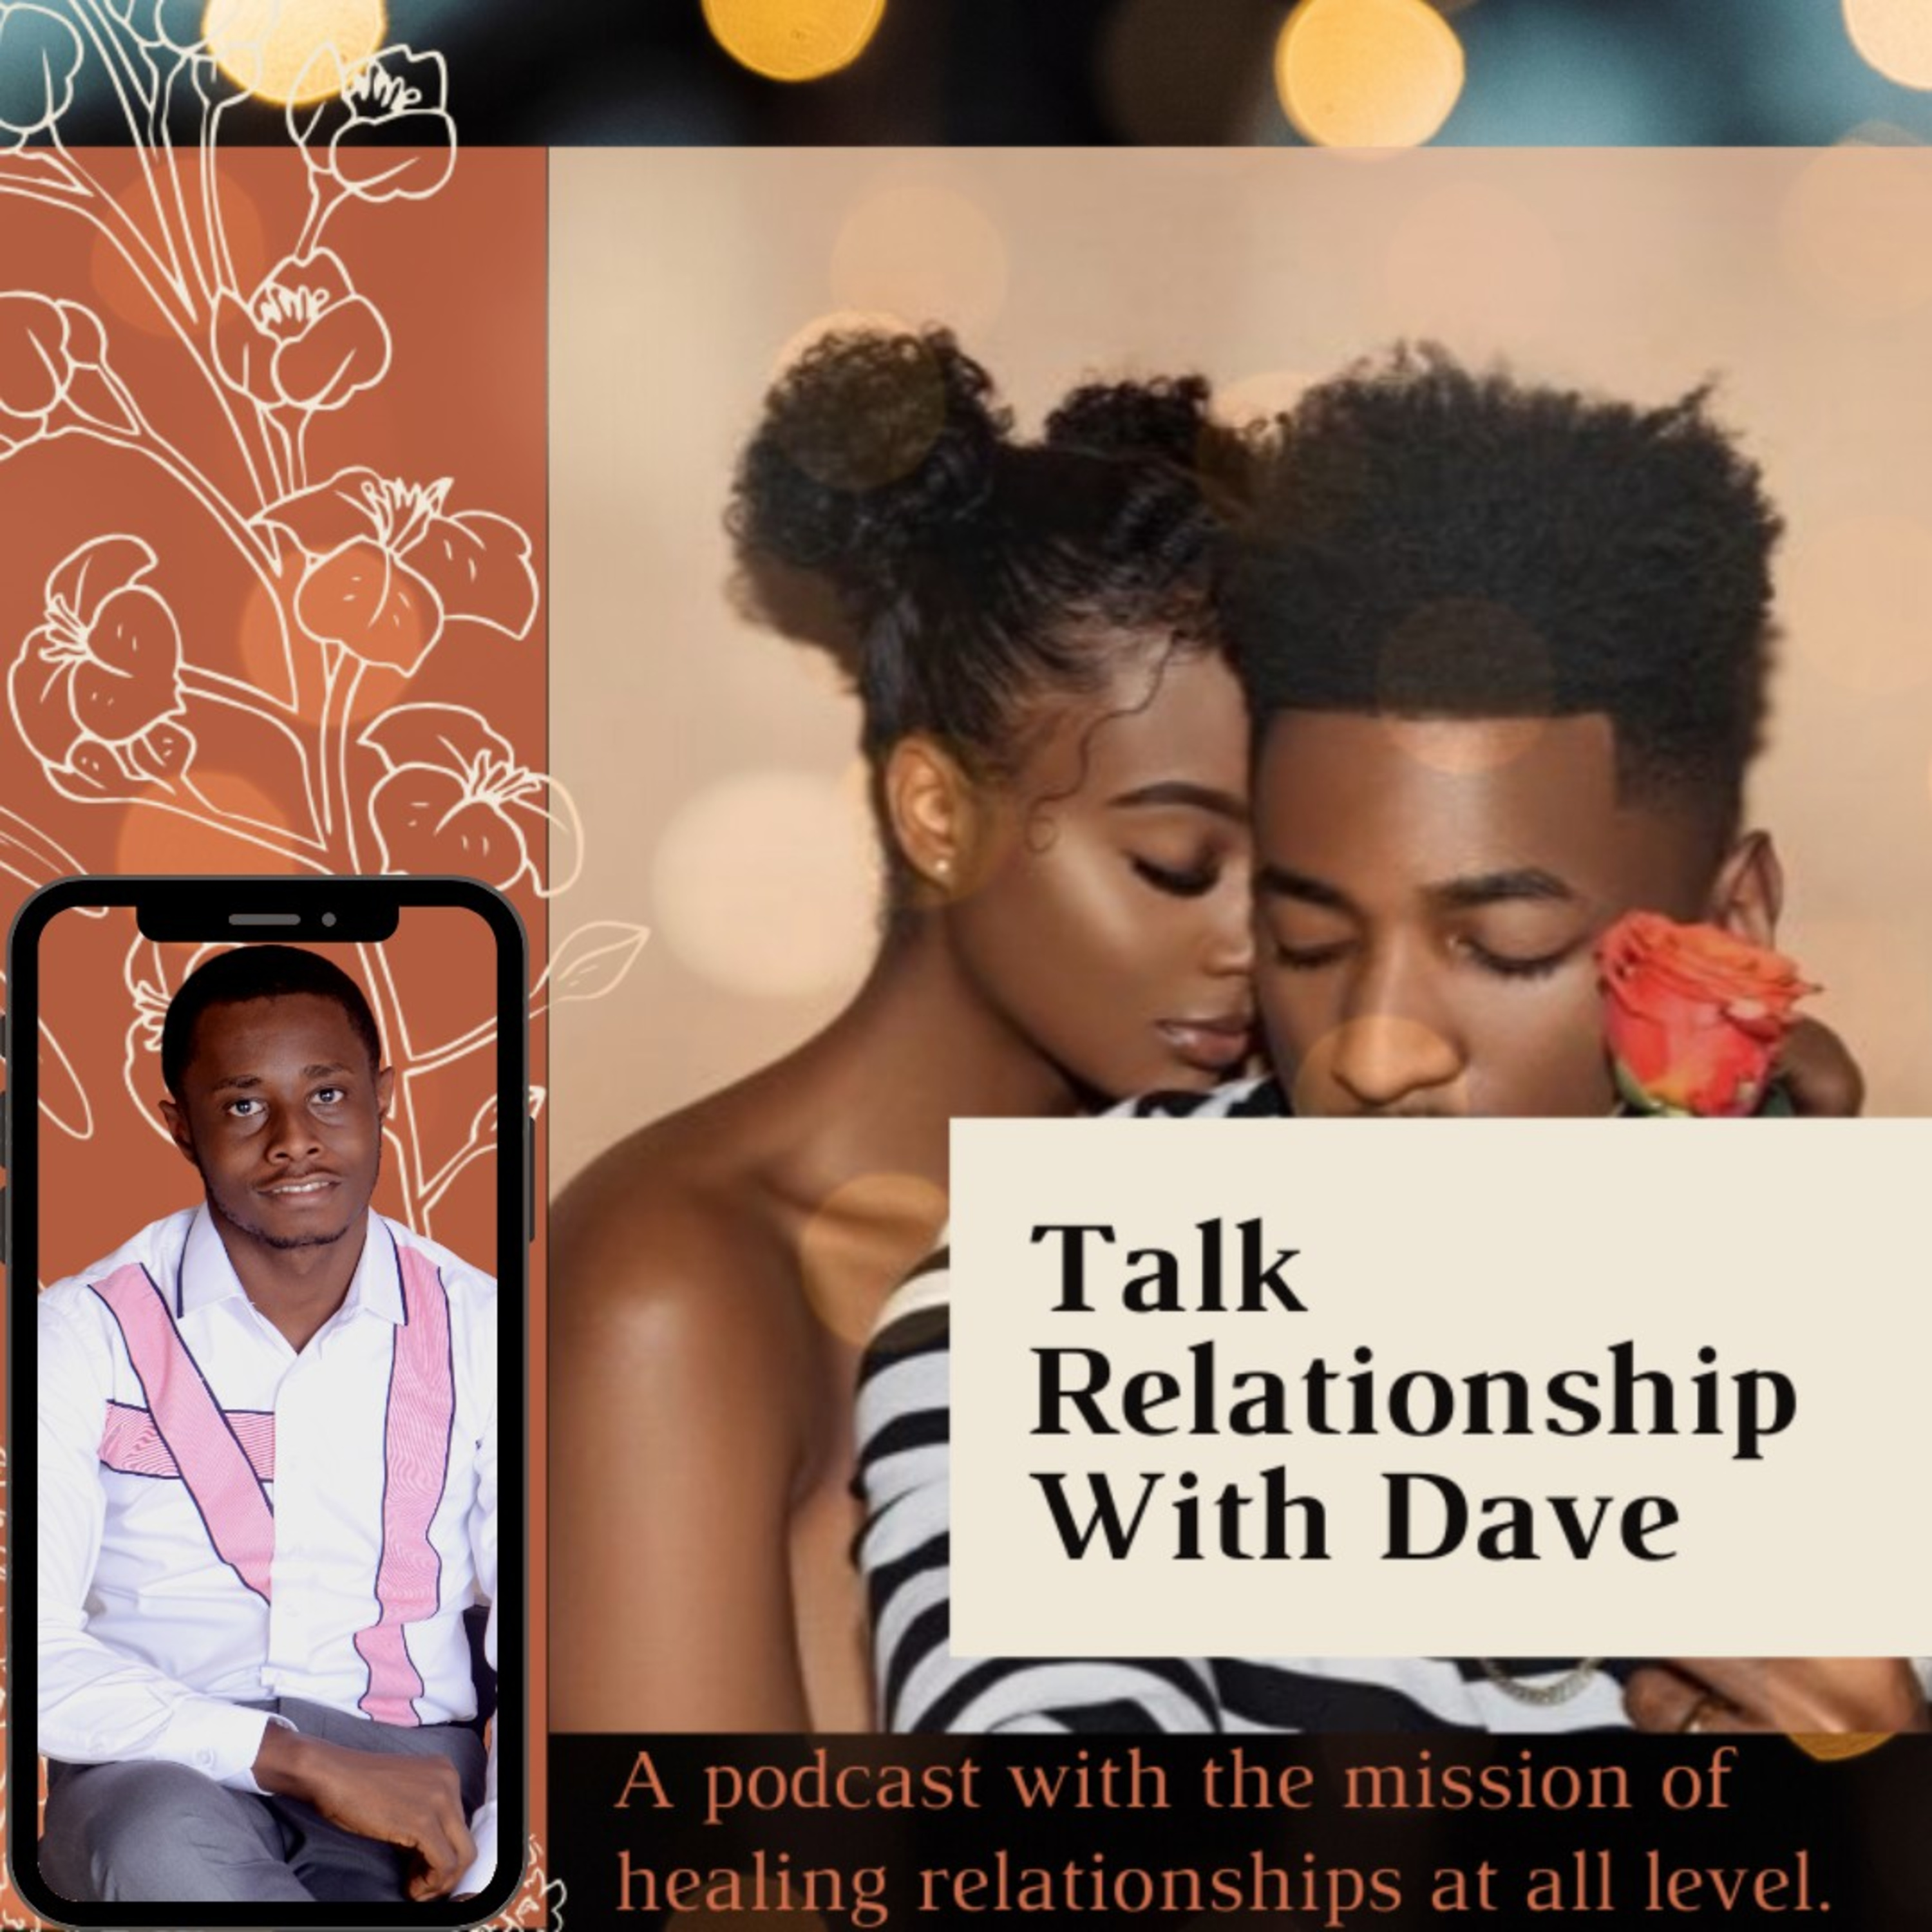 Talk Relationships With Dave on Jamit